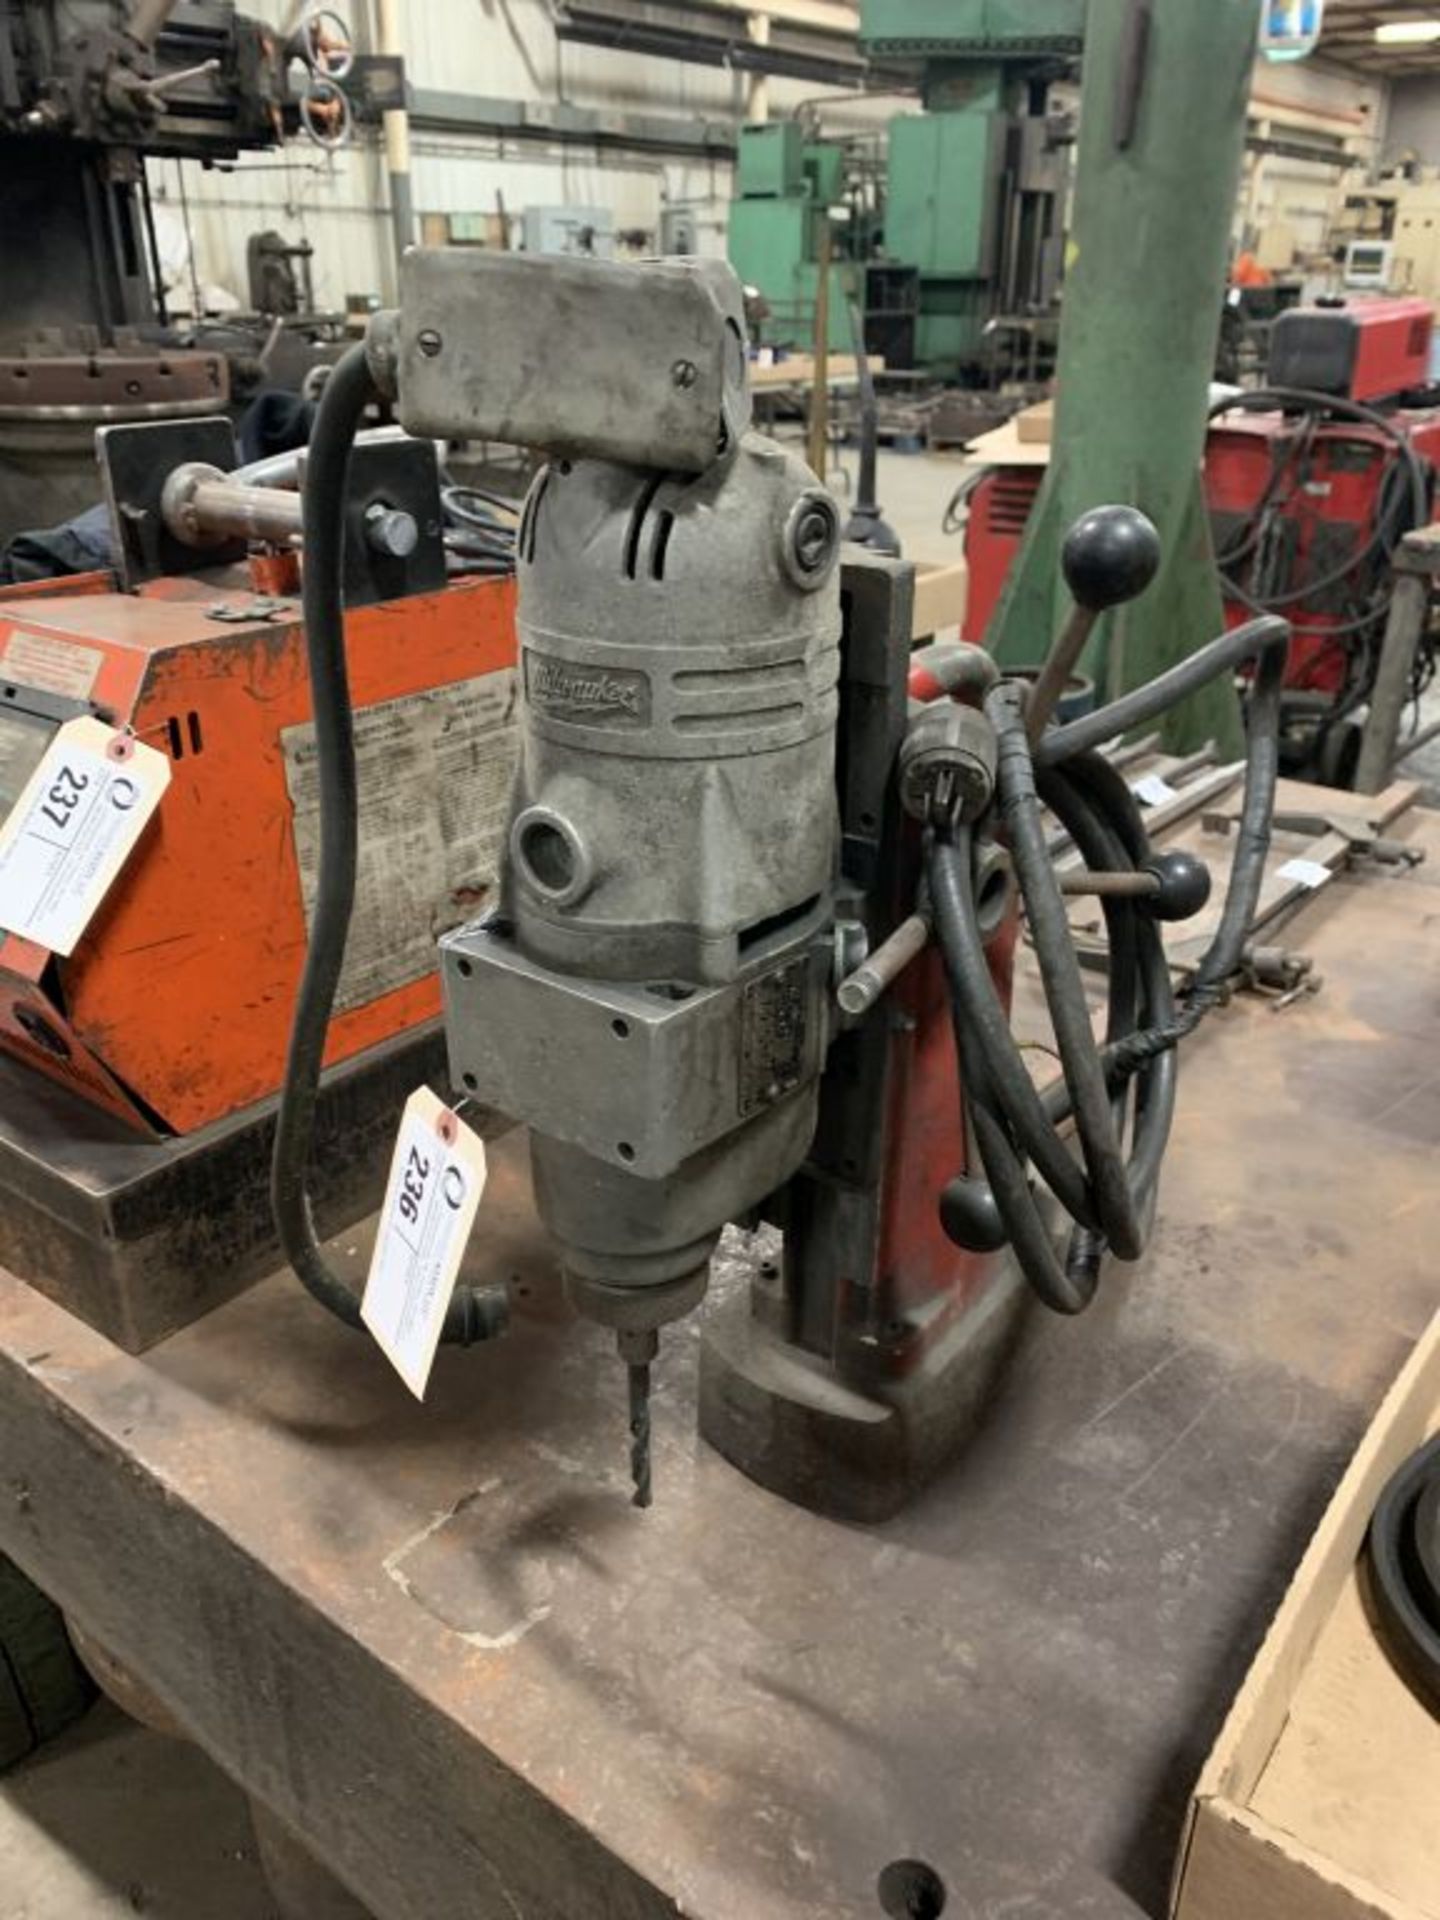 Milwaukee 1/2" magnetic drill, model 4221